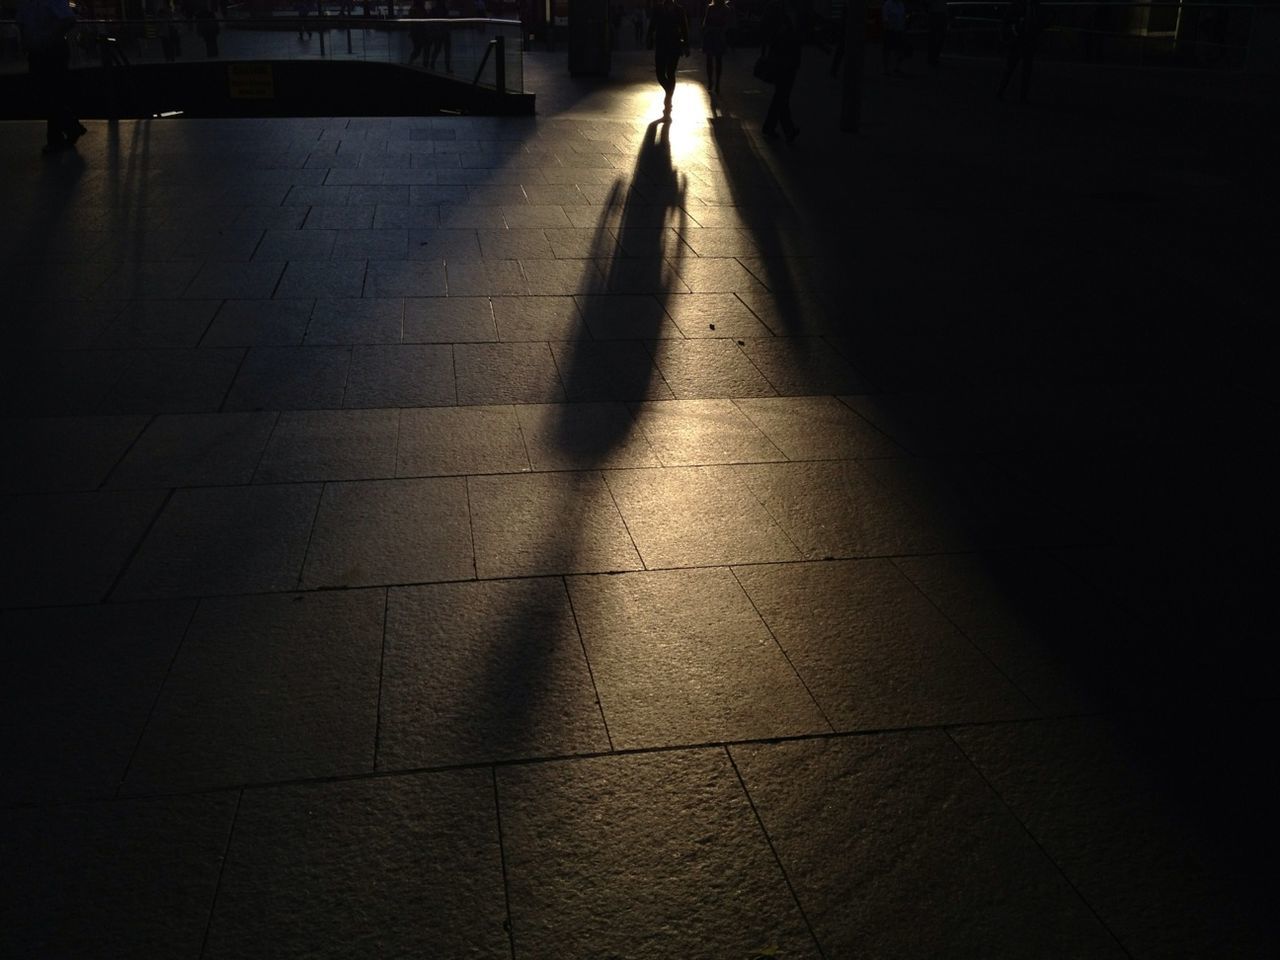 the way forward, tiled floor, diminishing perspective, paving stone, night, cobblestone, illuminated, flooring, walkway, footpath, shadow, in a row, empty, sunlight, vanishing point, indoors, built structure, architecture, pattern, pavement